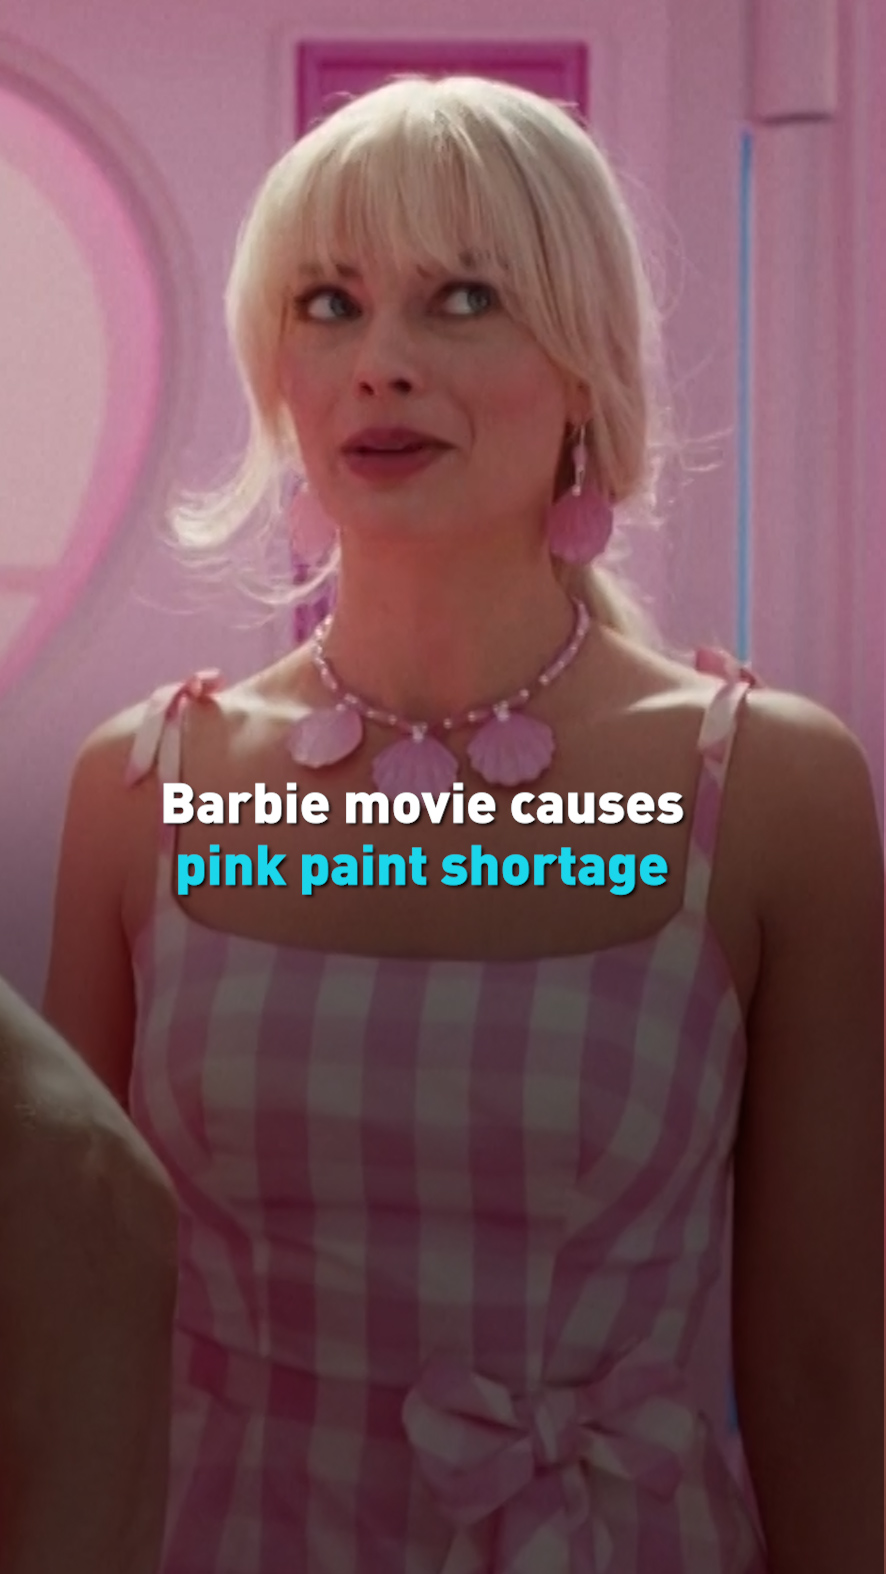 Pink paint shortage: Where to buy after Barbie movie causes shortage